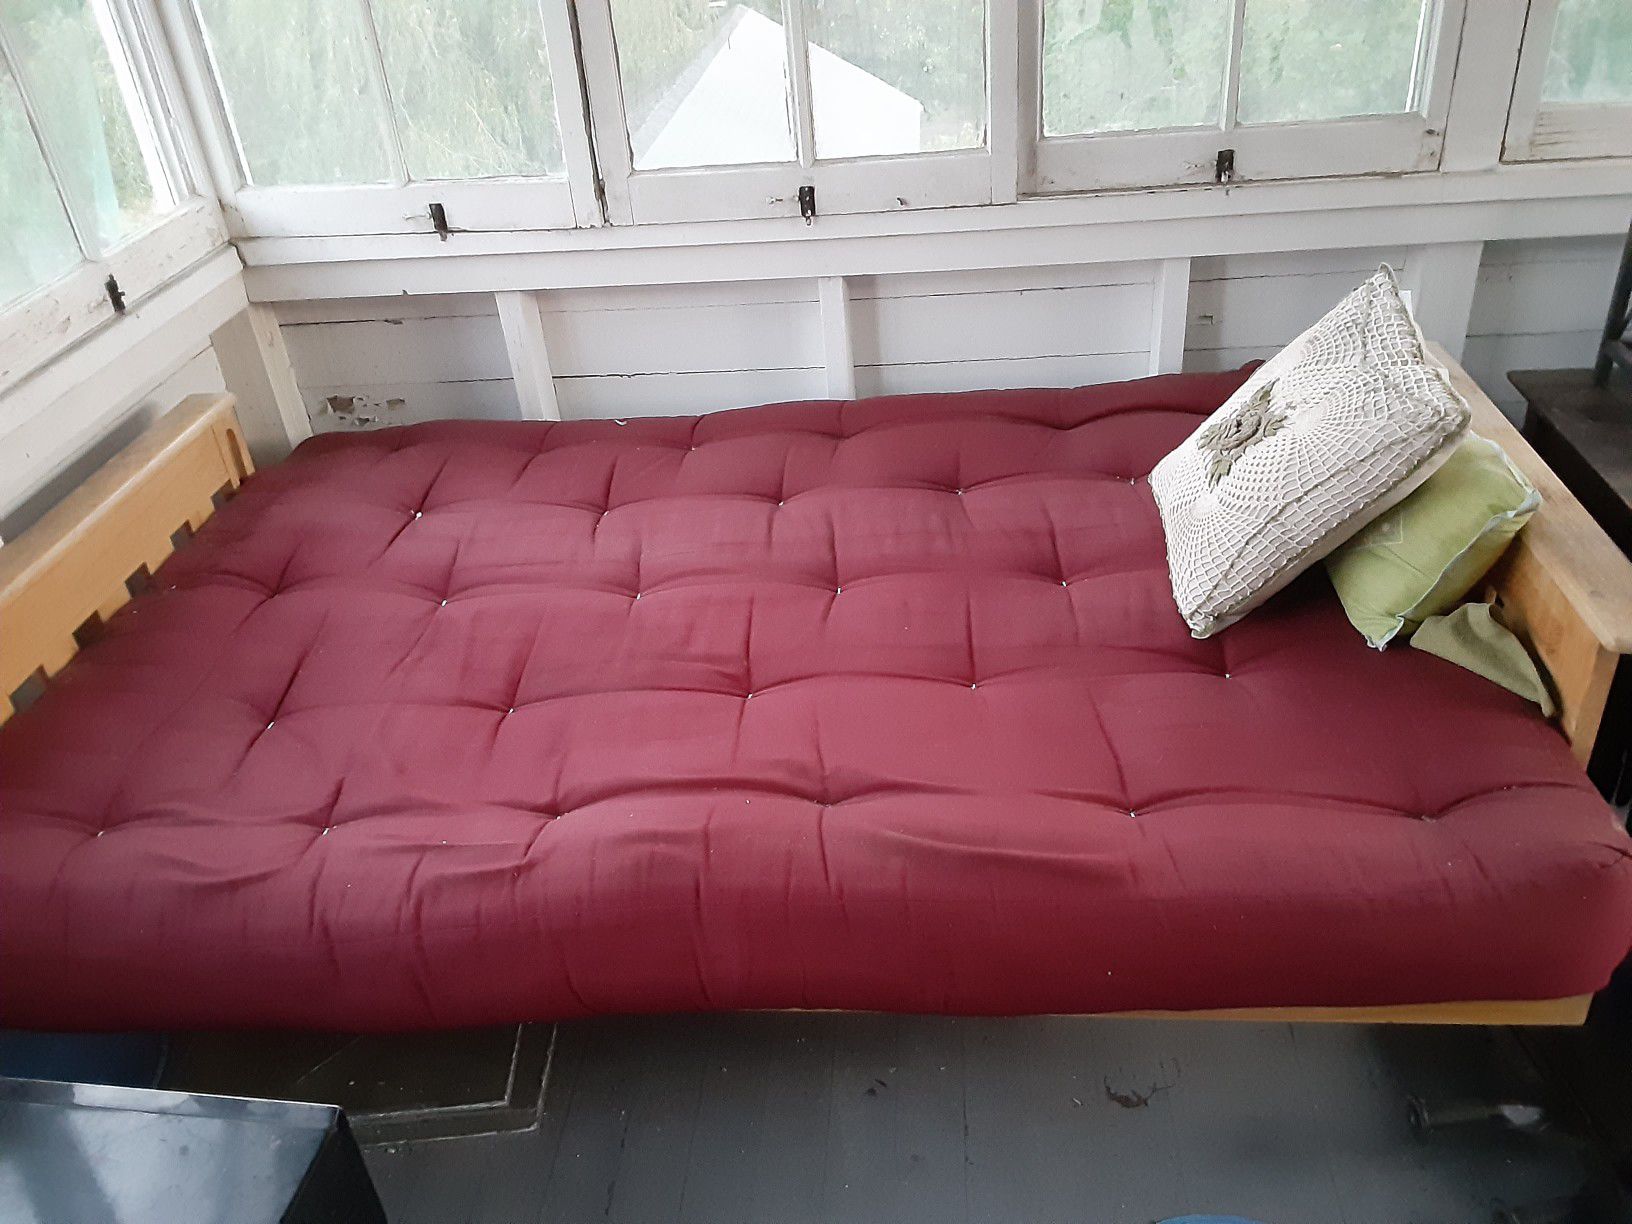 Full size futon folds to couch